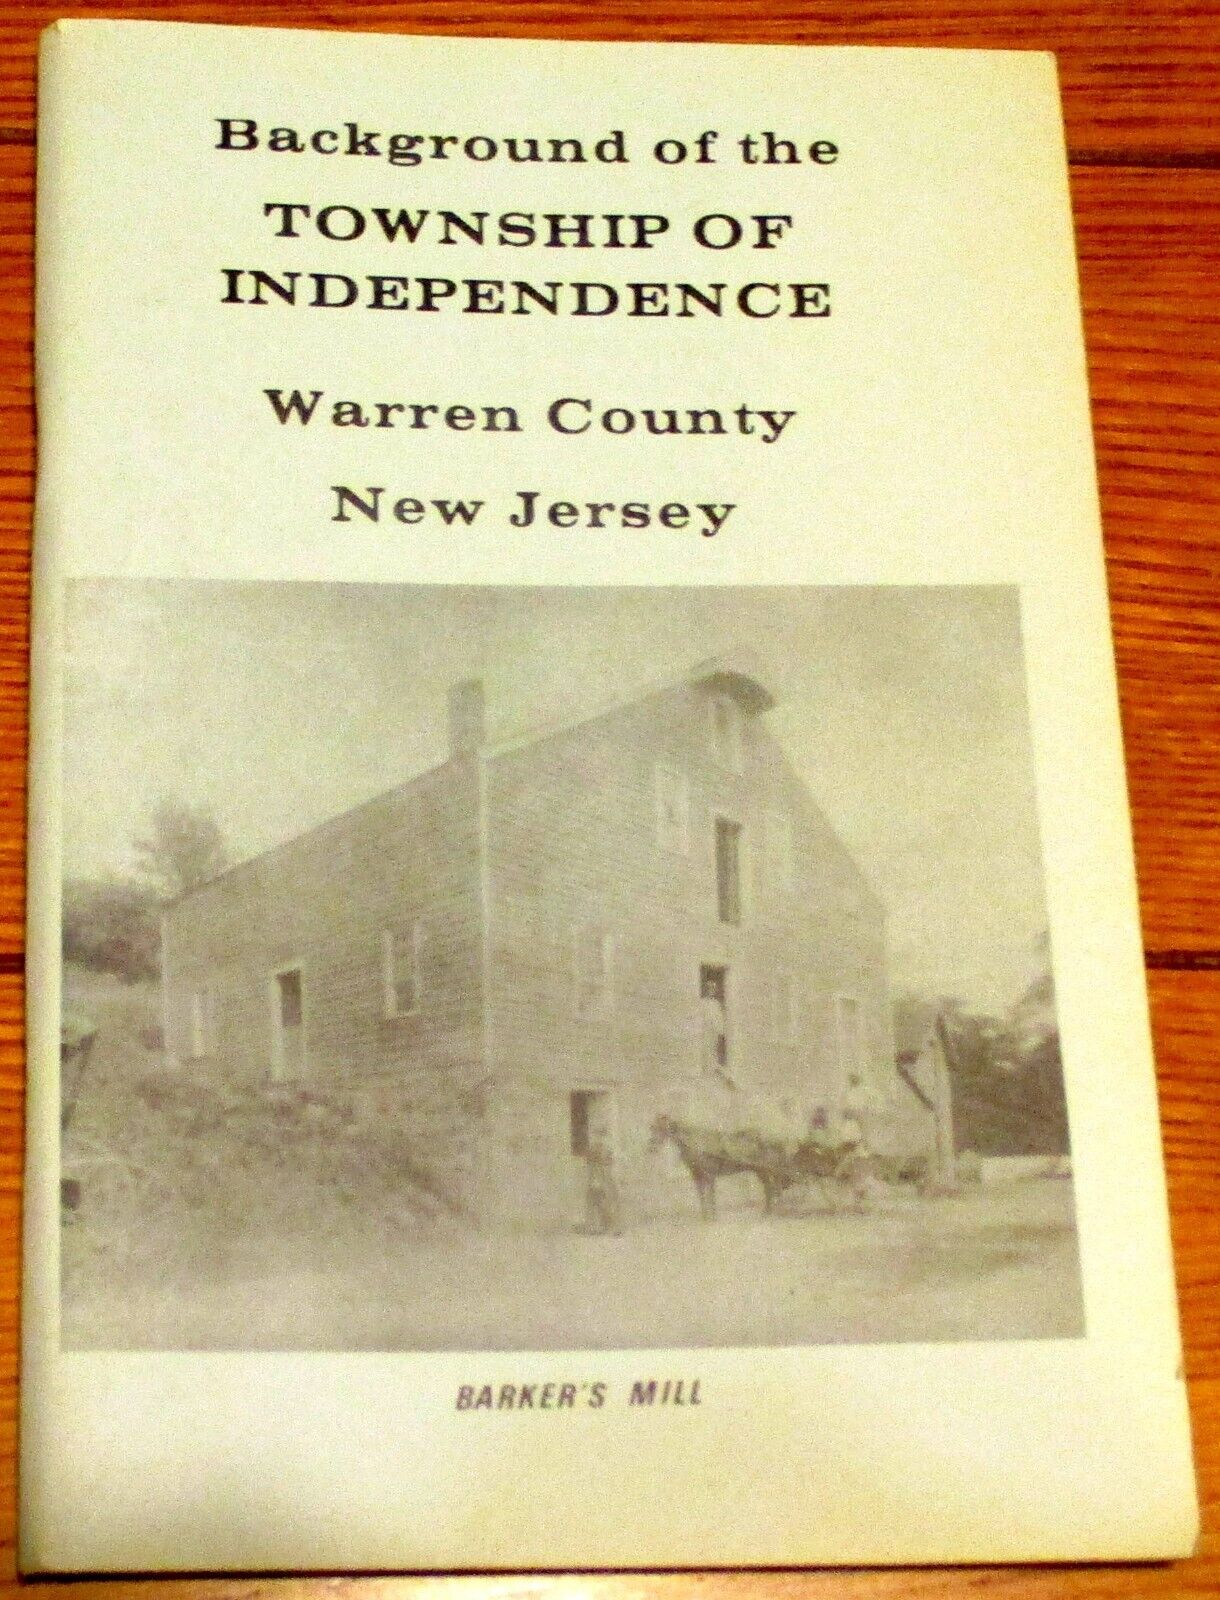 1976 Background of the Township of Independence  Warren County NJ  Booklet